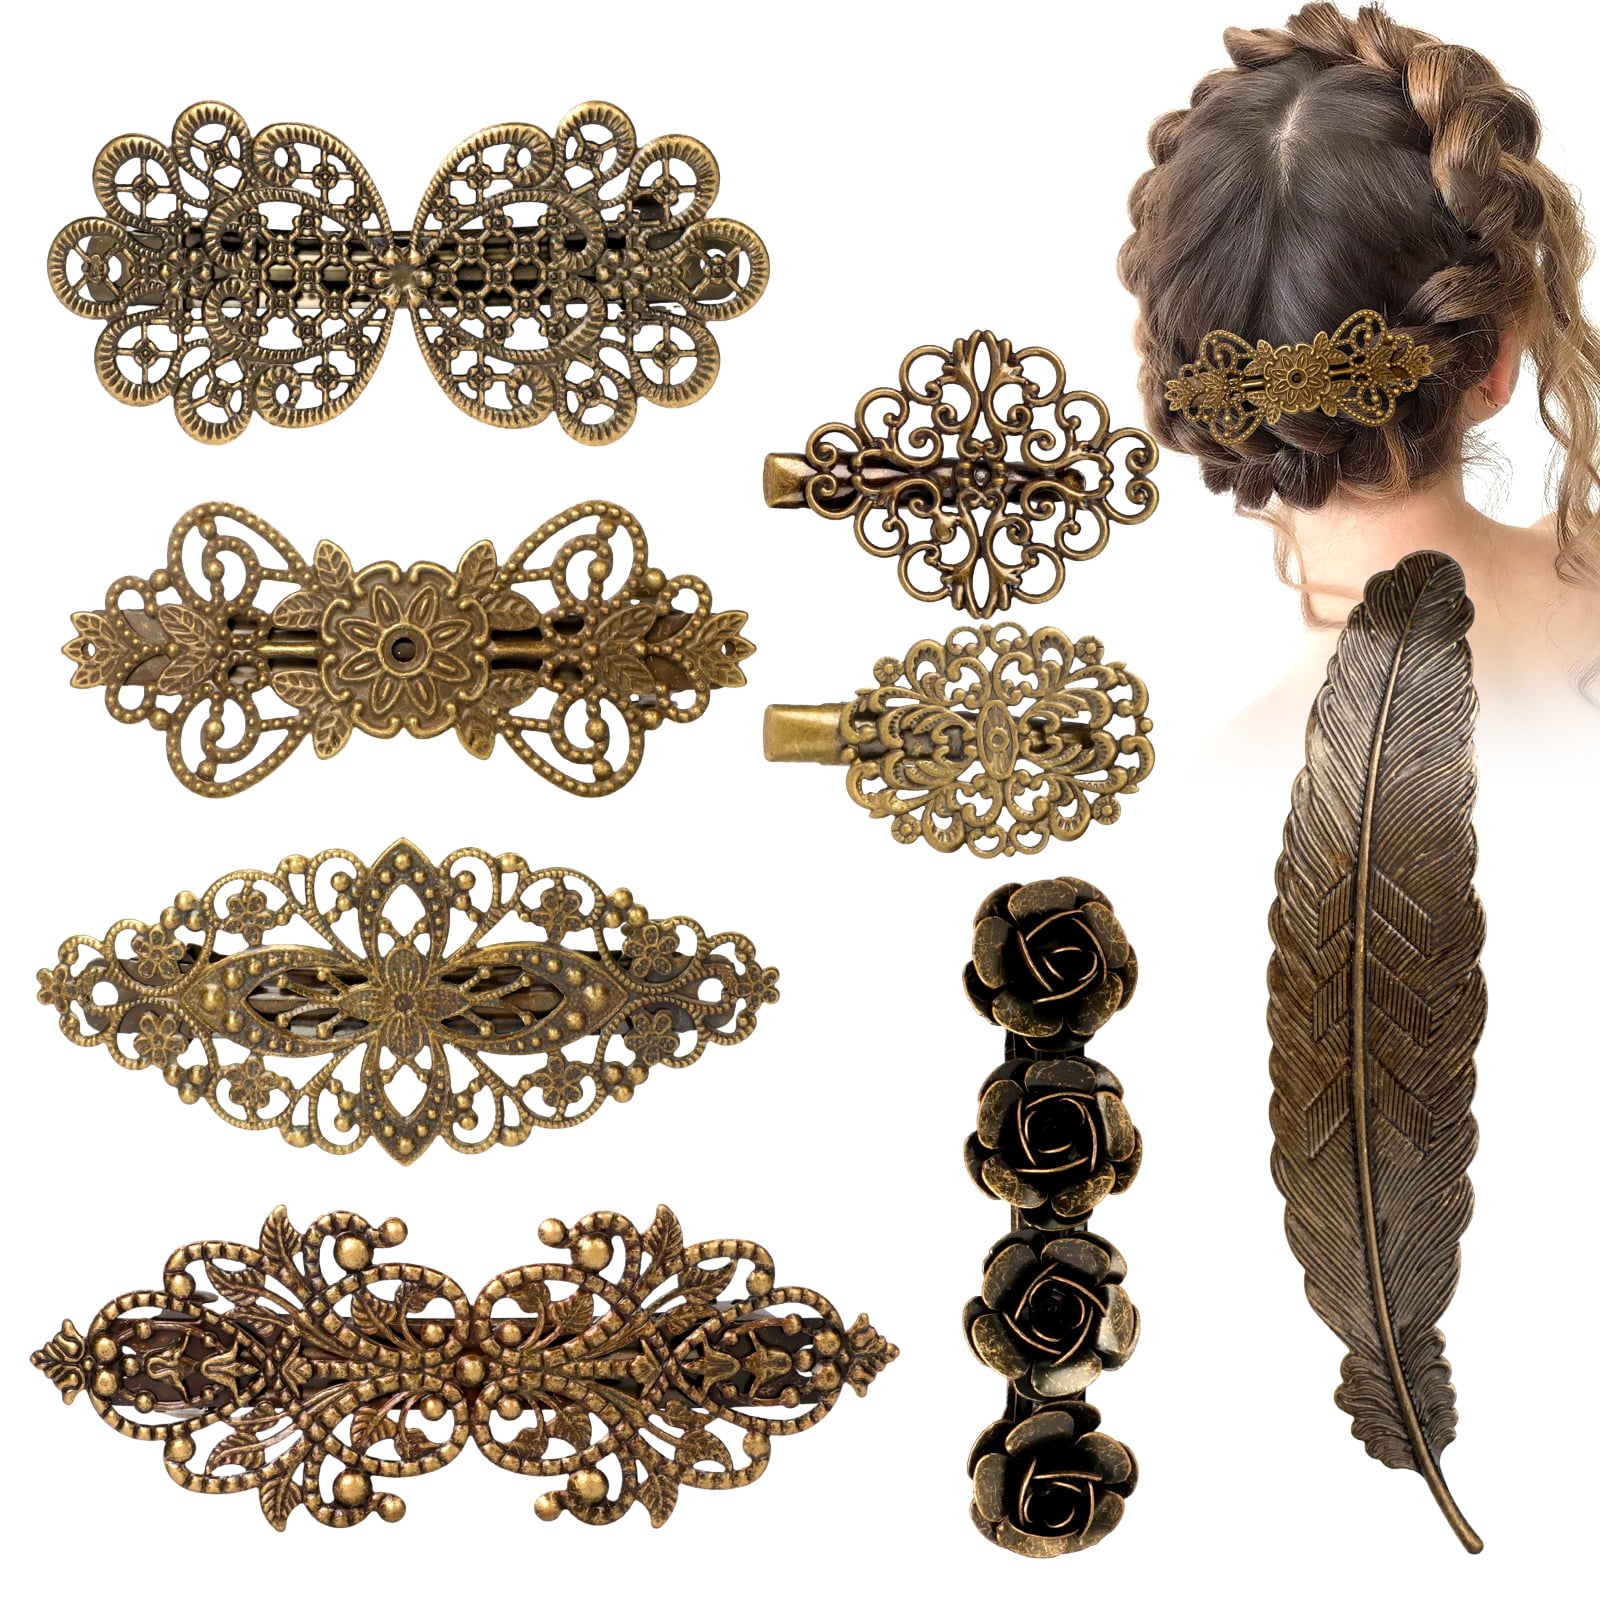 8 PCS Vintage Hair Barrettes French Retro Hair Clips Metal Bronze Color Vintage Flower Vine Feather Leaf Hair Clips Set Bridal Wedding Hairpins Vintage Hair Accessories For Women Girls Gifts